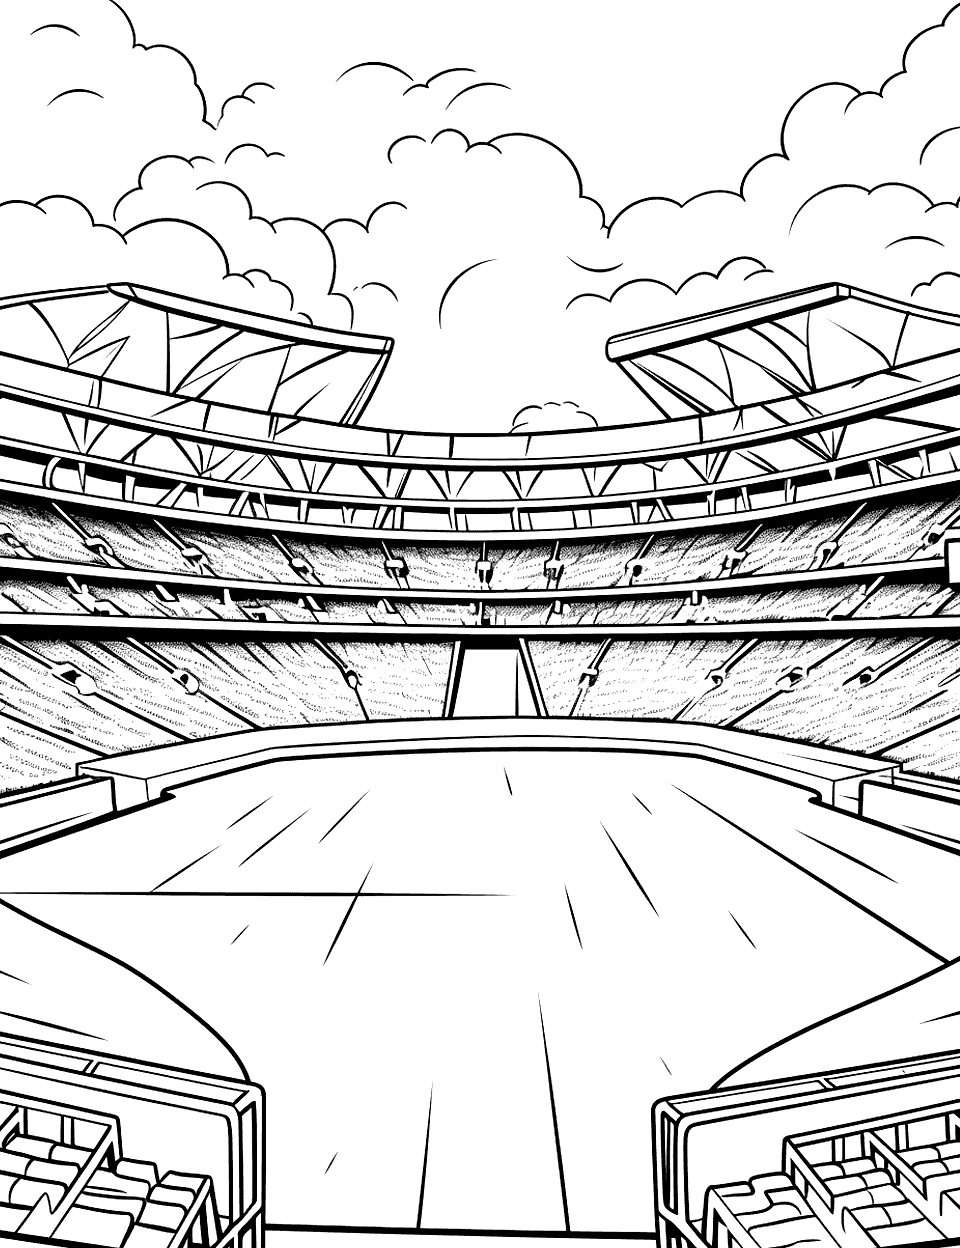 Game Ending Shot Baseball Coloring Page - A beautiful shot of the stadium as a game comes to a close.